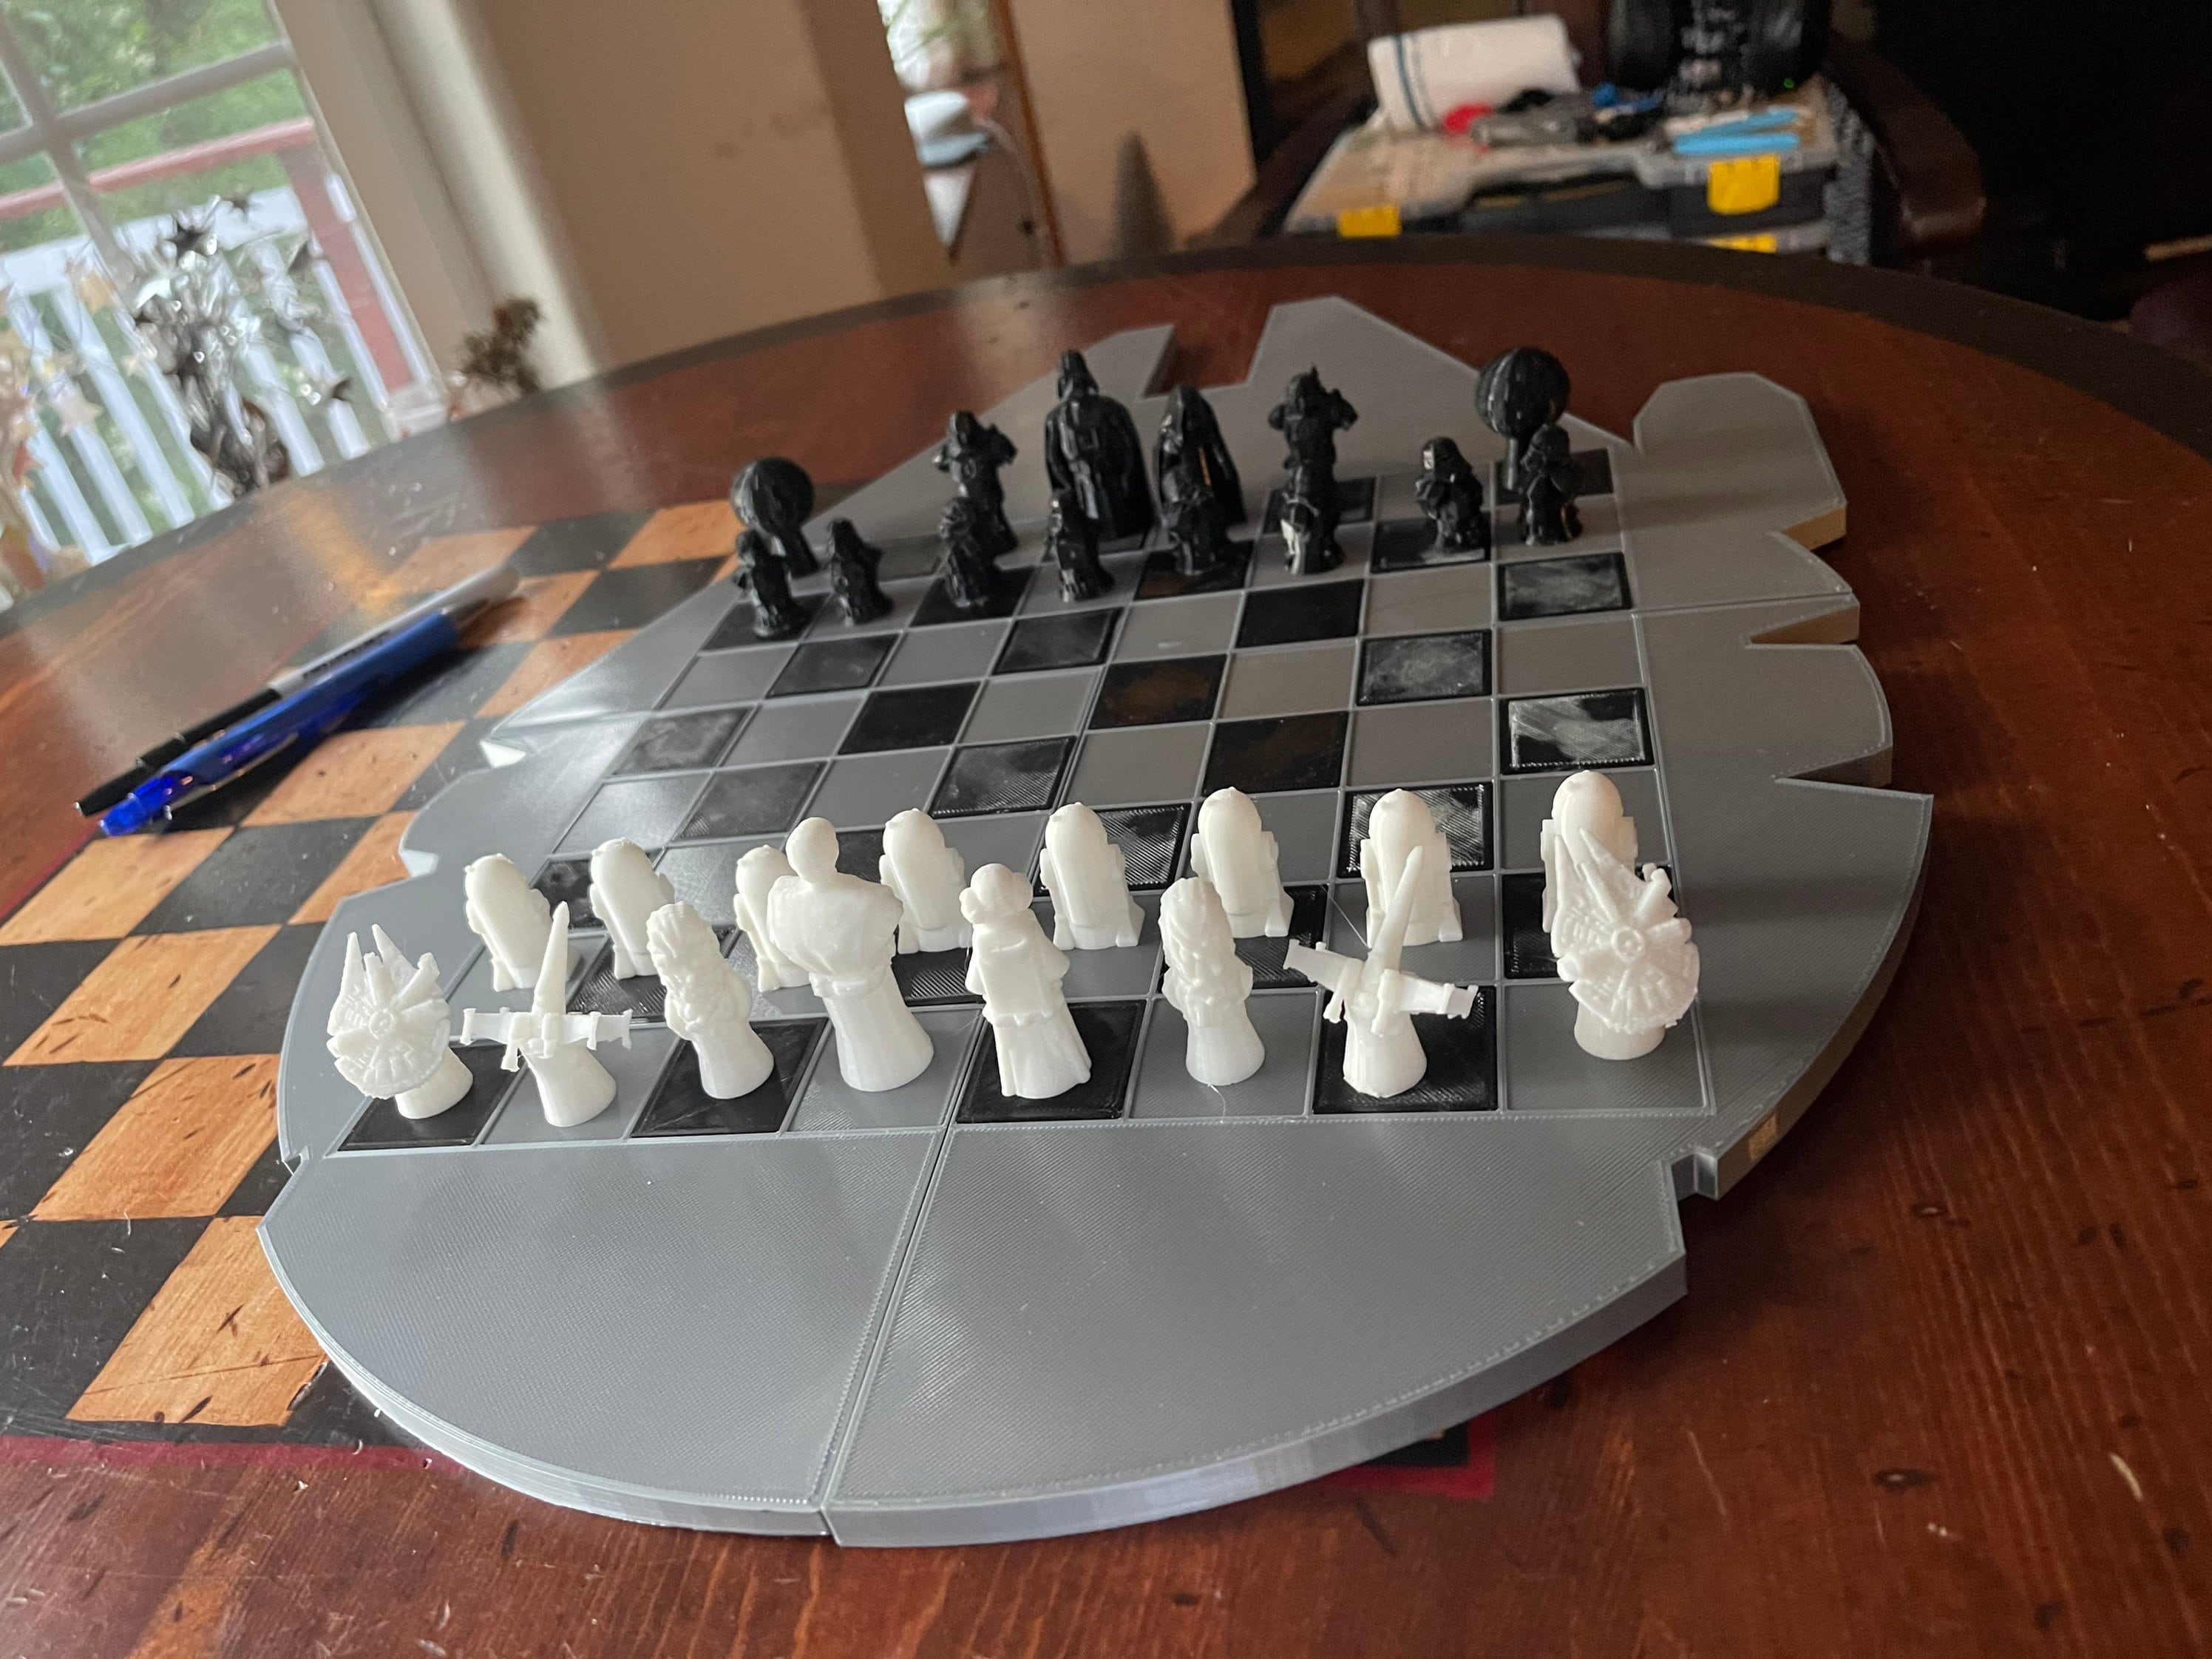 2005 Star Wars Saga Edition Chess Set Replacement Figures Pieces